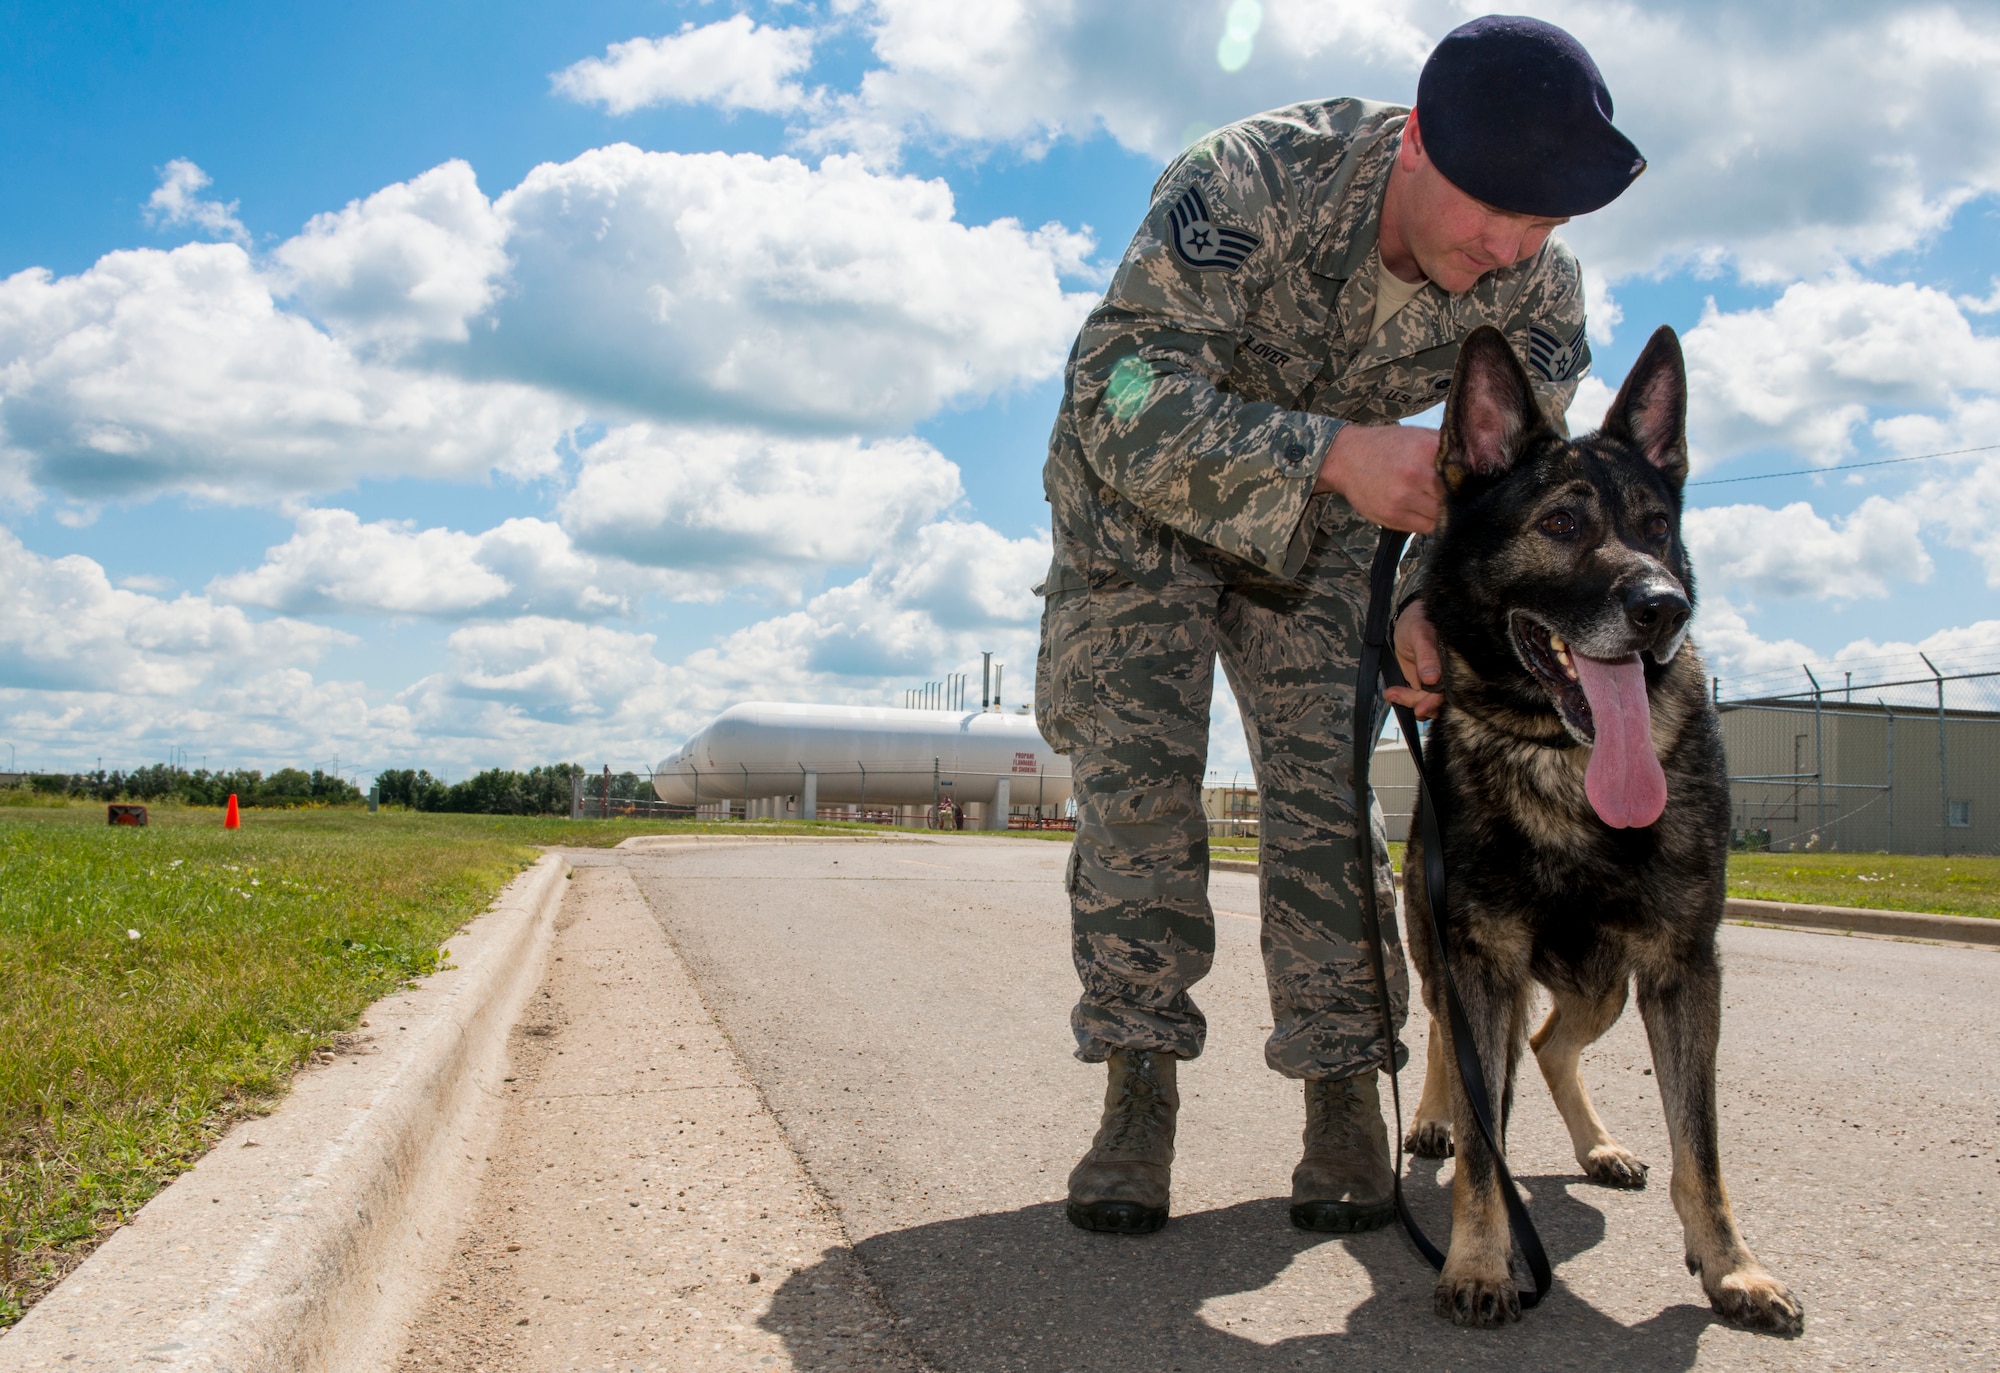 Staff Sgt. Tim Glover, 5th Security Forces Squadron military working dog handler, attaches a leash to the collar of his MWD Roko before a walk near the kennels on Minot Air Force Base, N.D., July 28, 2014. Handlers spend a lot of time bonding and building trust with their dogs when they are new to their duty station to create a cohesive team. (U.S. Air Force photo/Senior Airman Stephanie Morris)